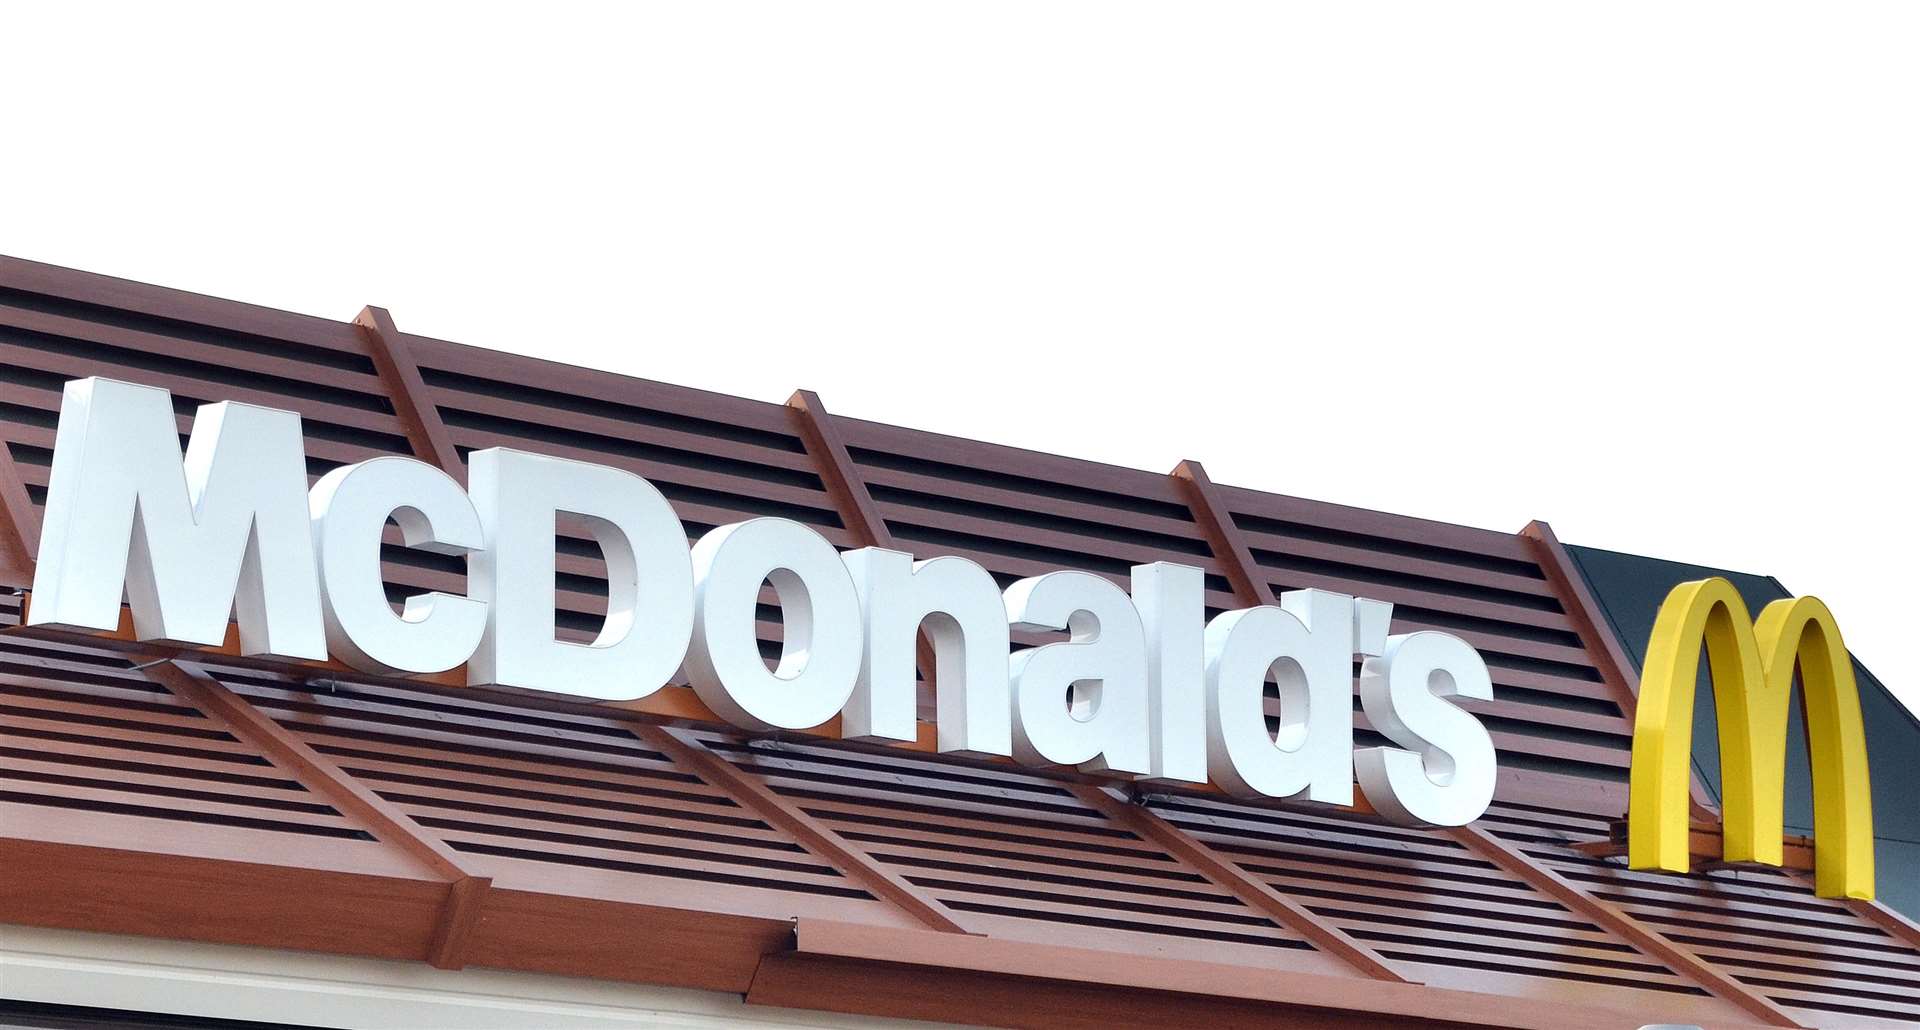 McDonald's is launching its delivery service in Tunbridge Wells